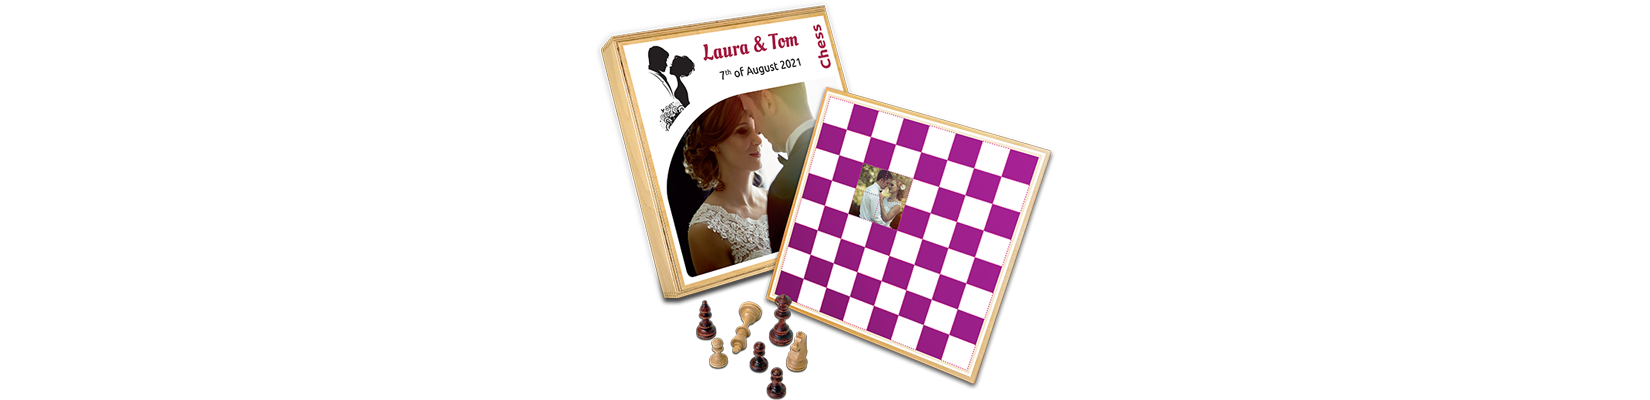 Custom made chess games make for great gifts